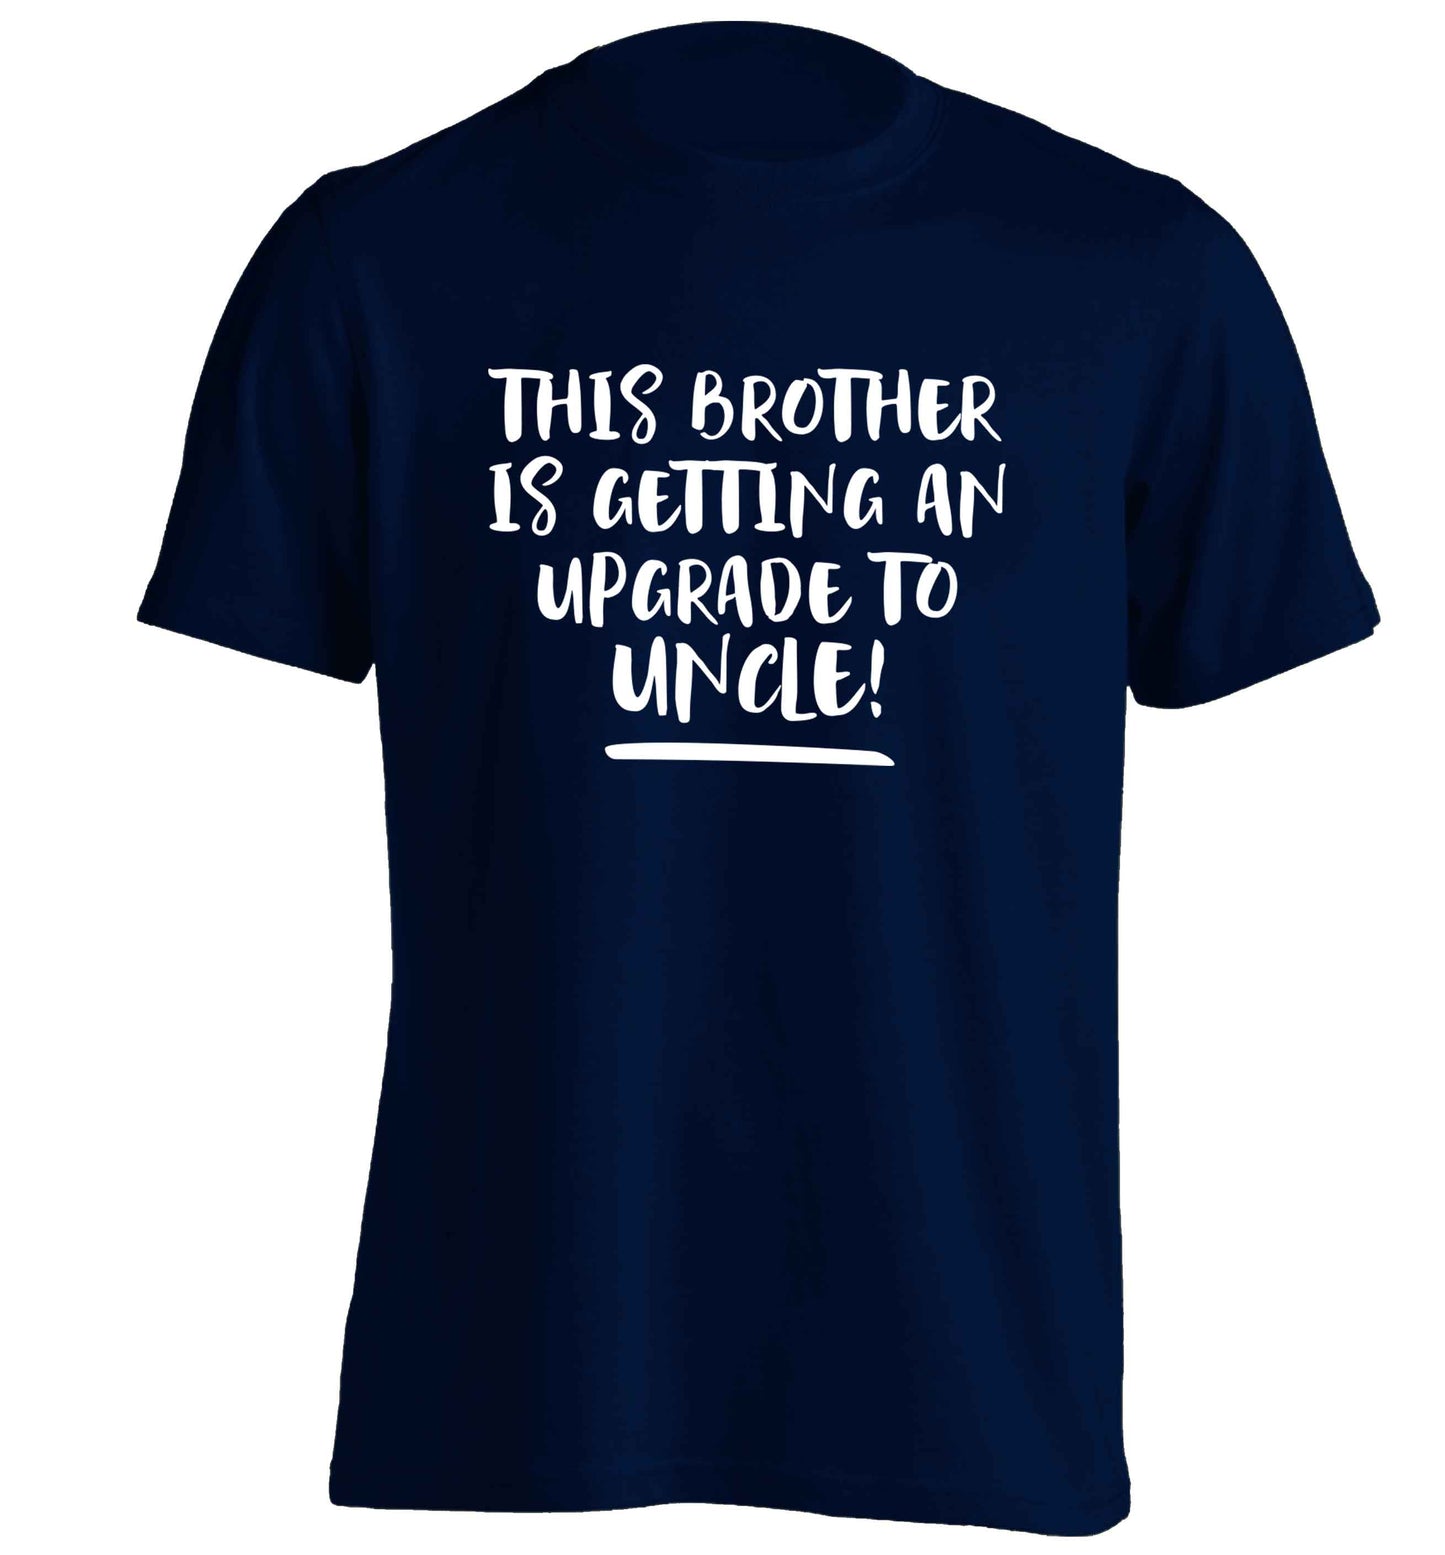 This brother is getting an upgrade to uncle! adults unisex navy Tshirt 2XL